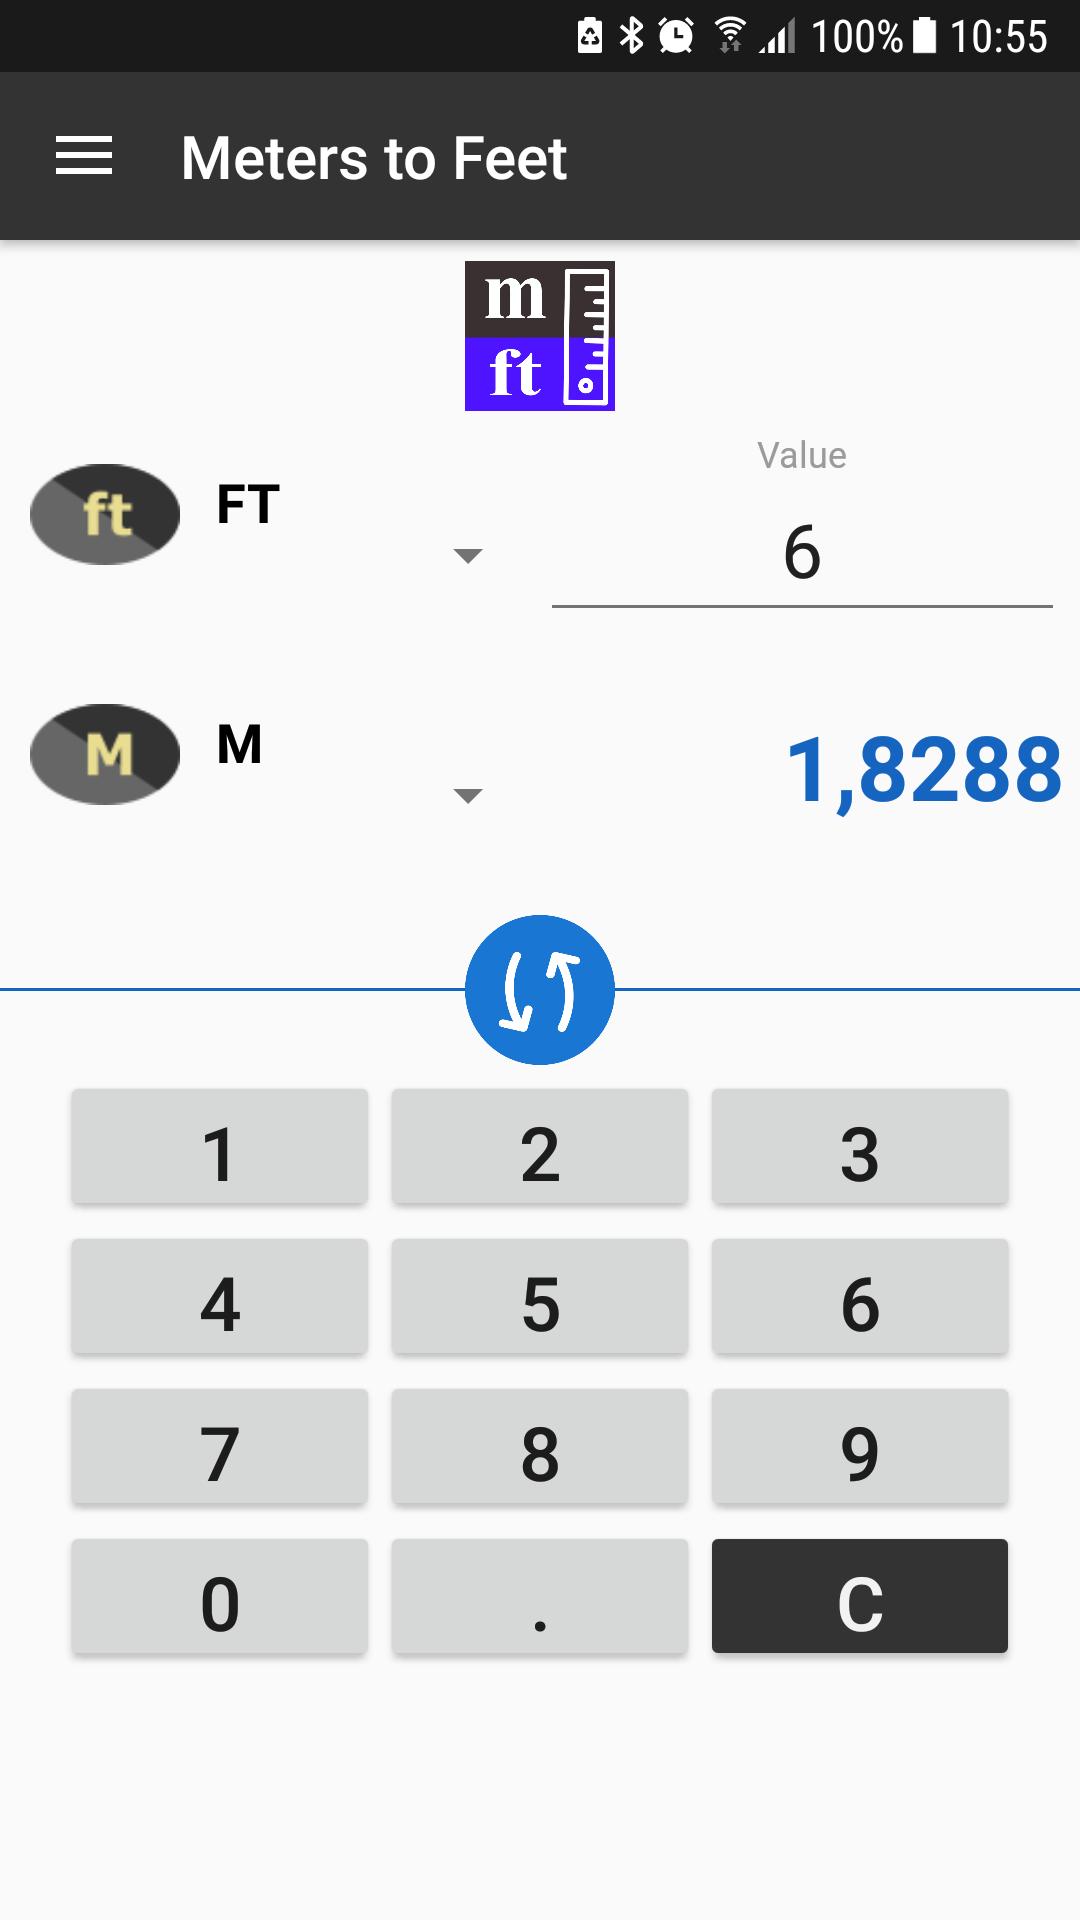 Meters to feet / m to ft converter for Android - APK Download